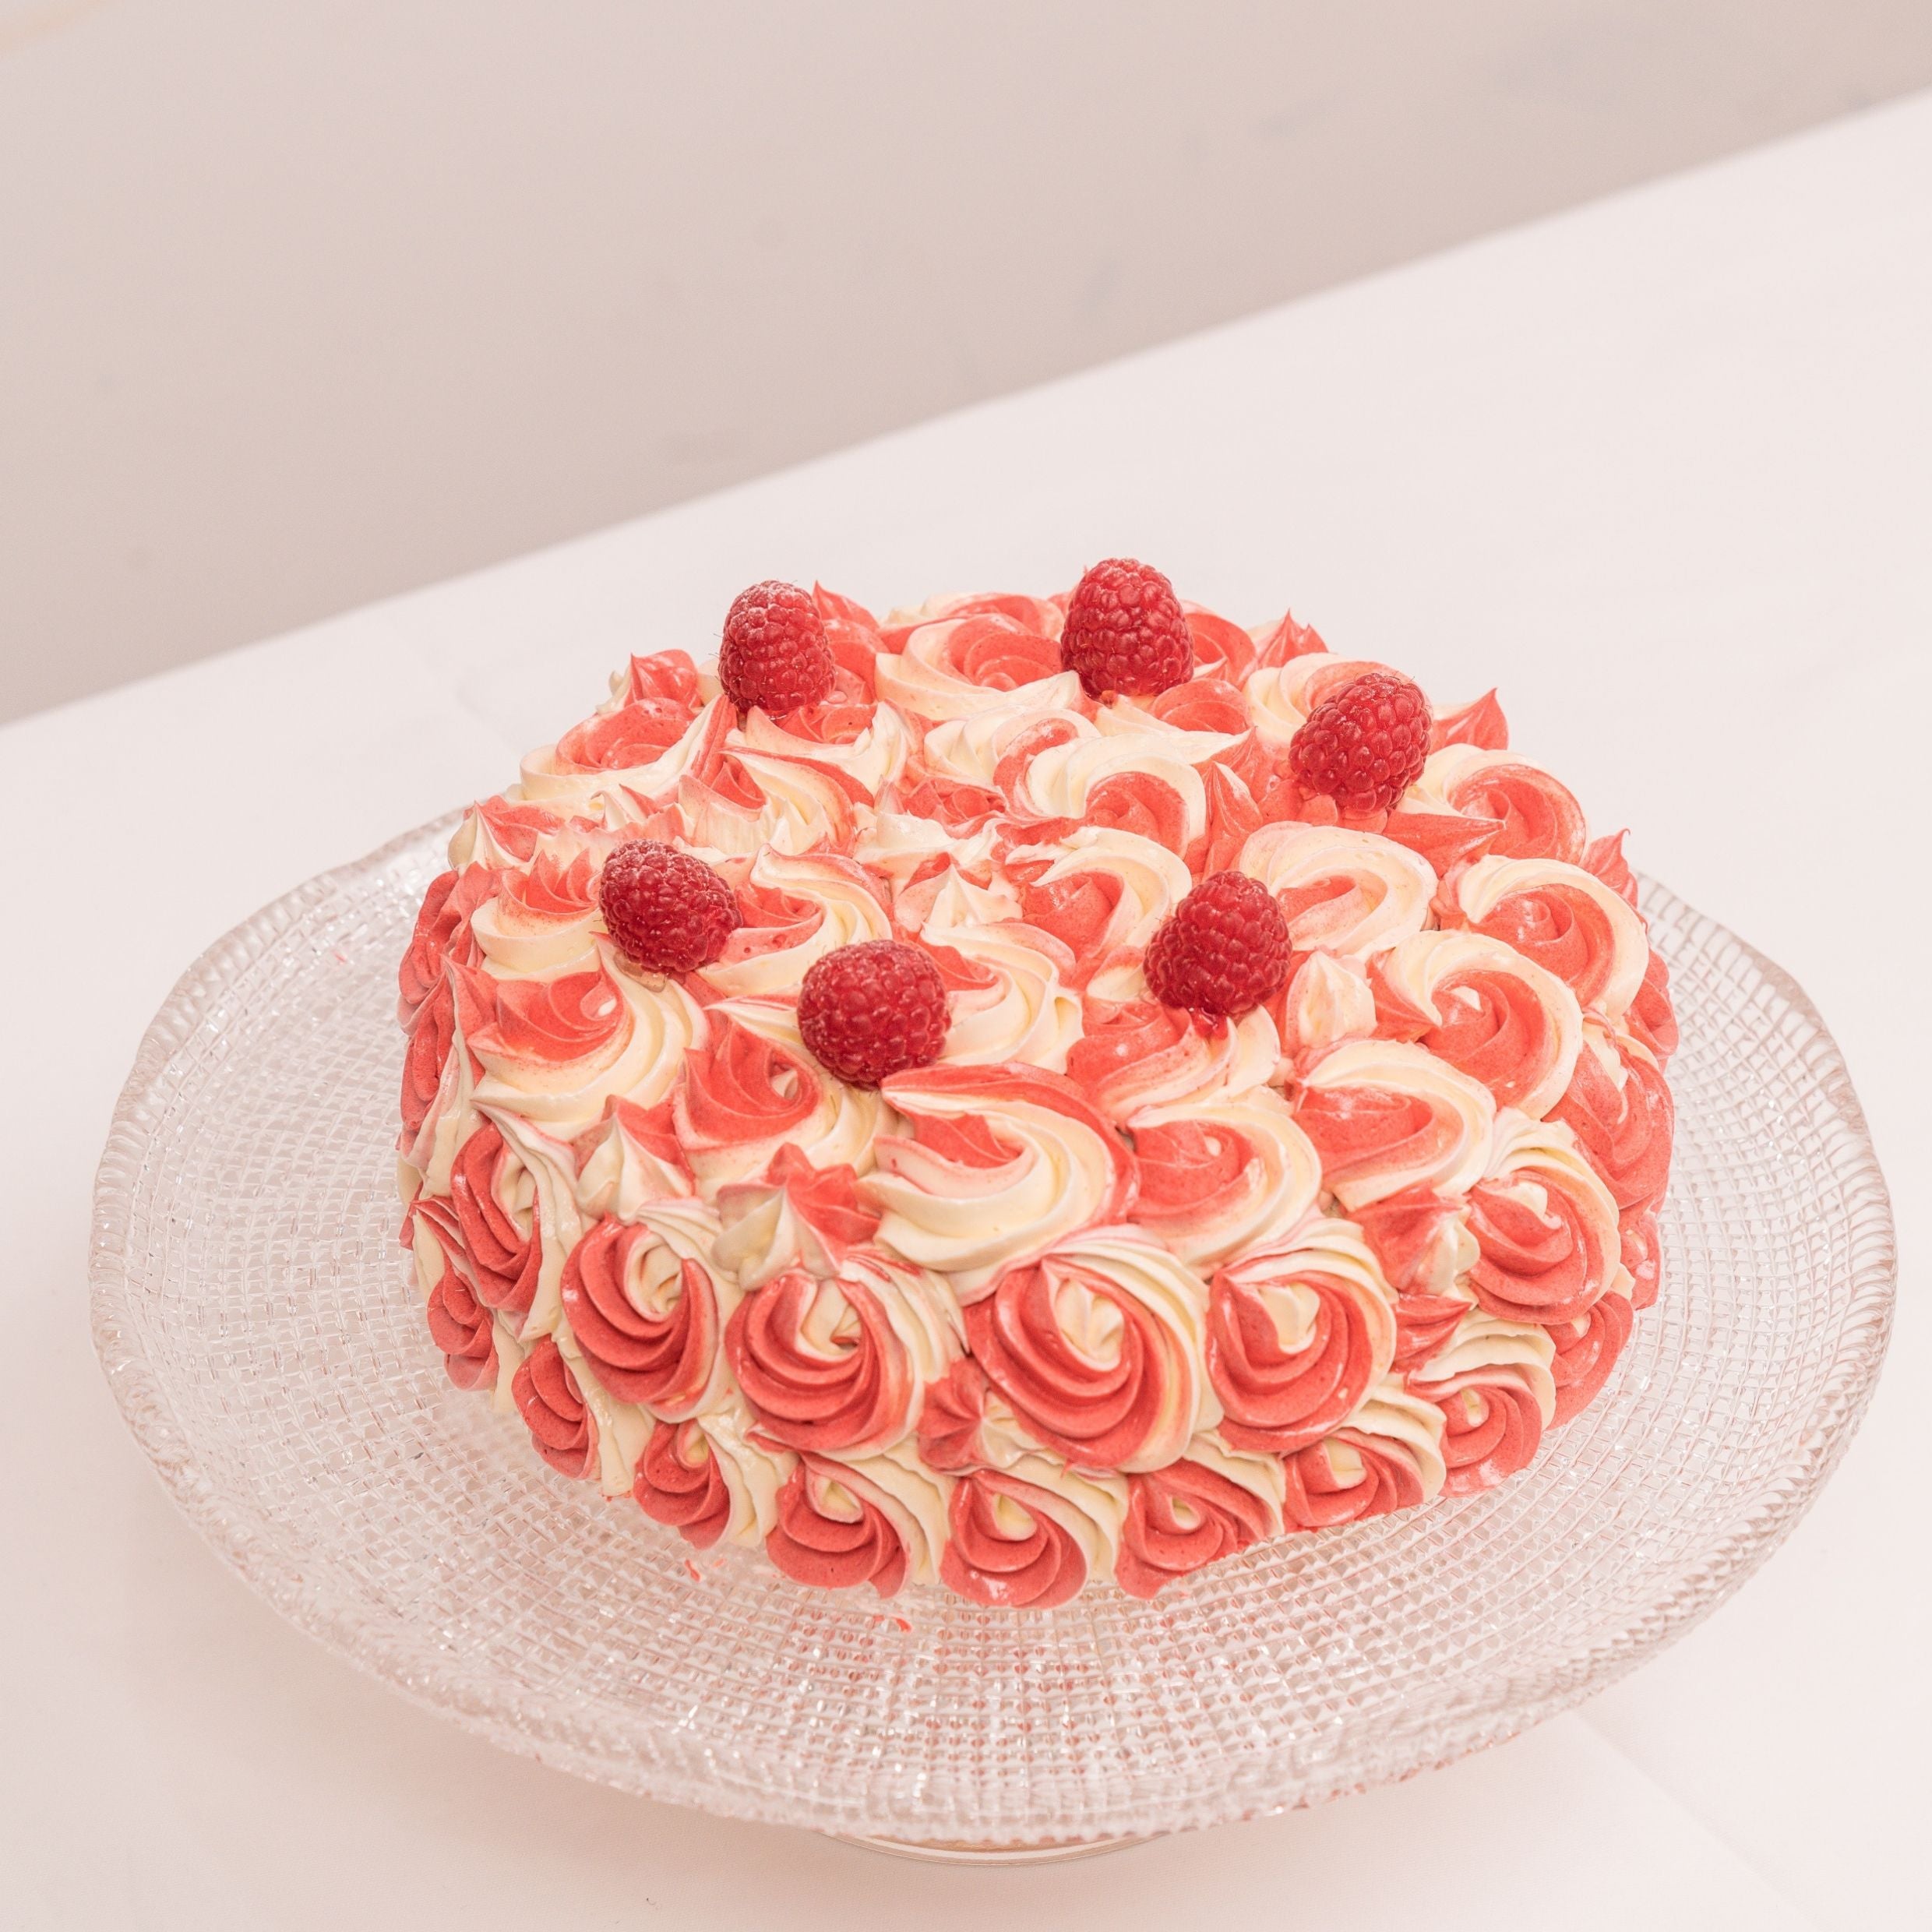 Almond, Raspberry and Lychee Cake (1kg)